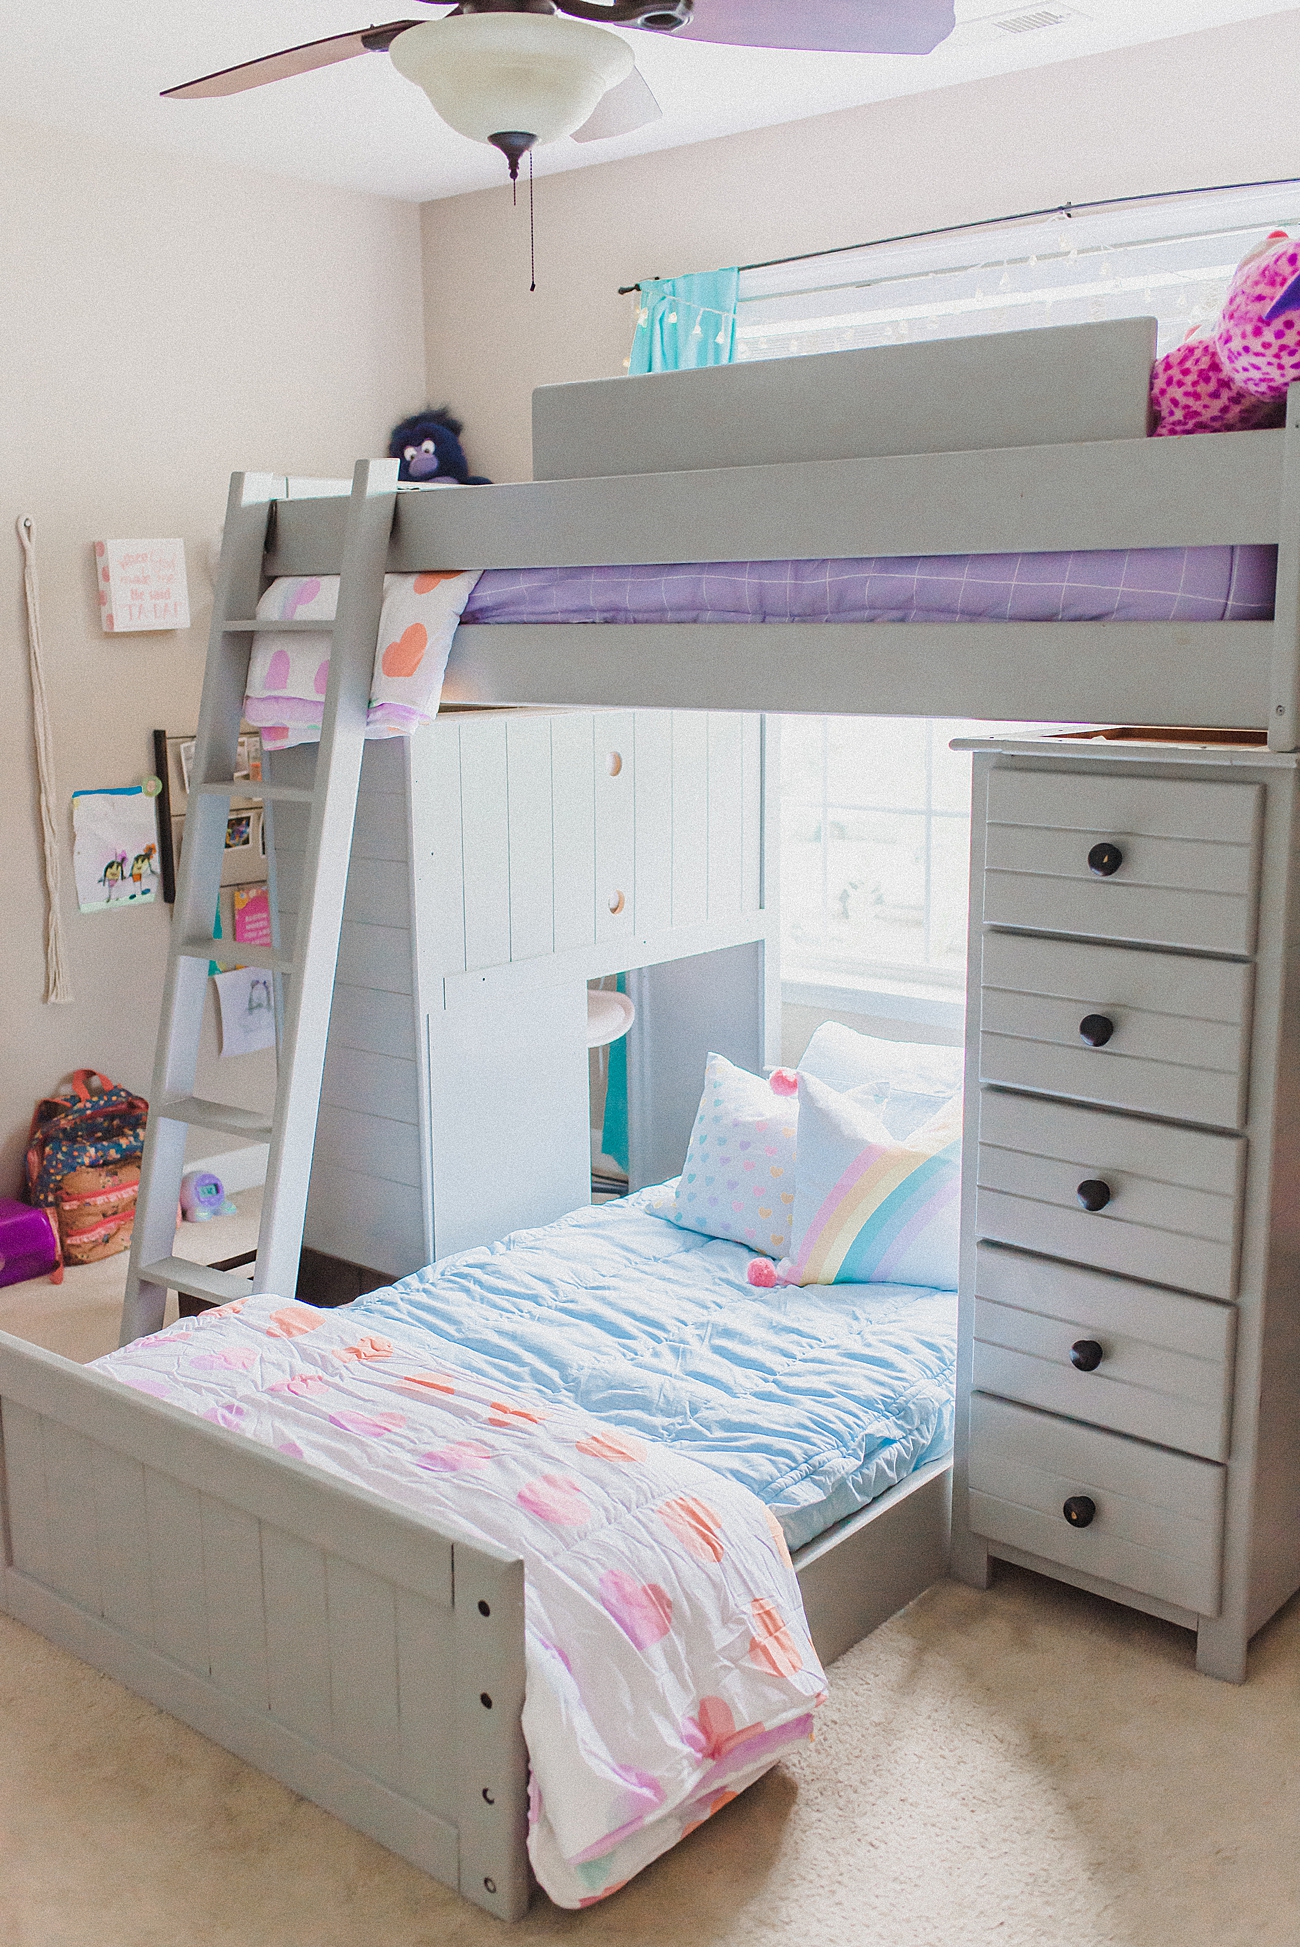 The Best Bedding For Bunk Beds Beddy, Fitted Blankets For Bunk Beds